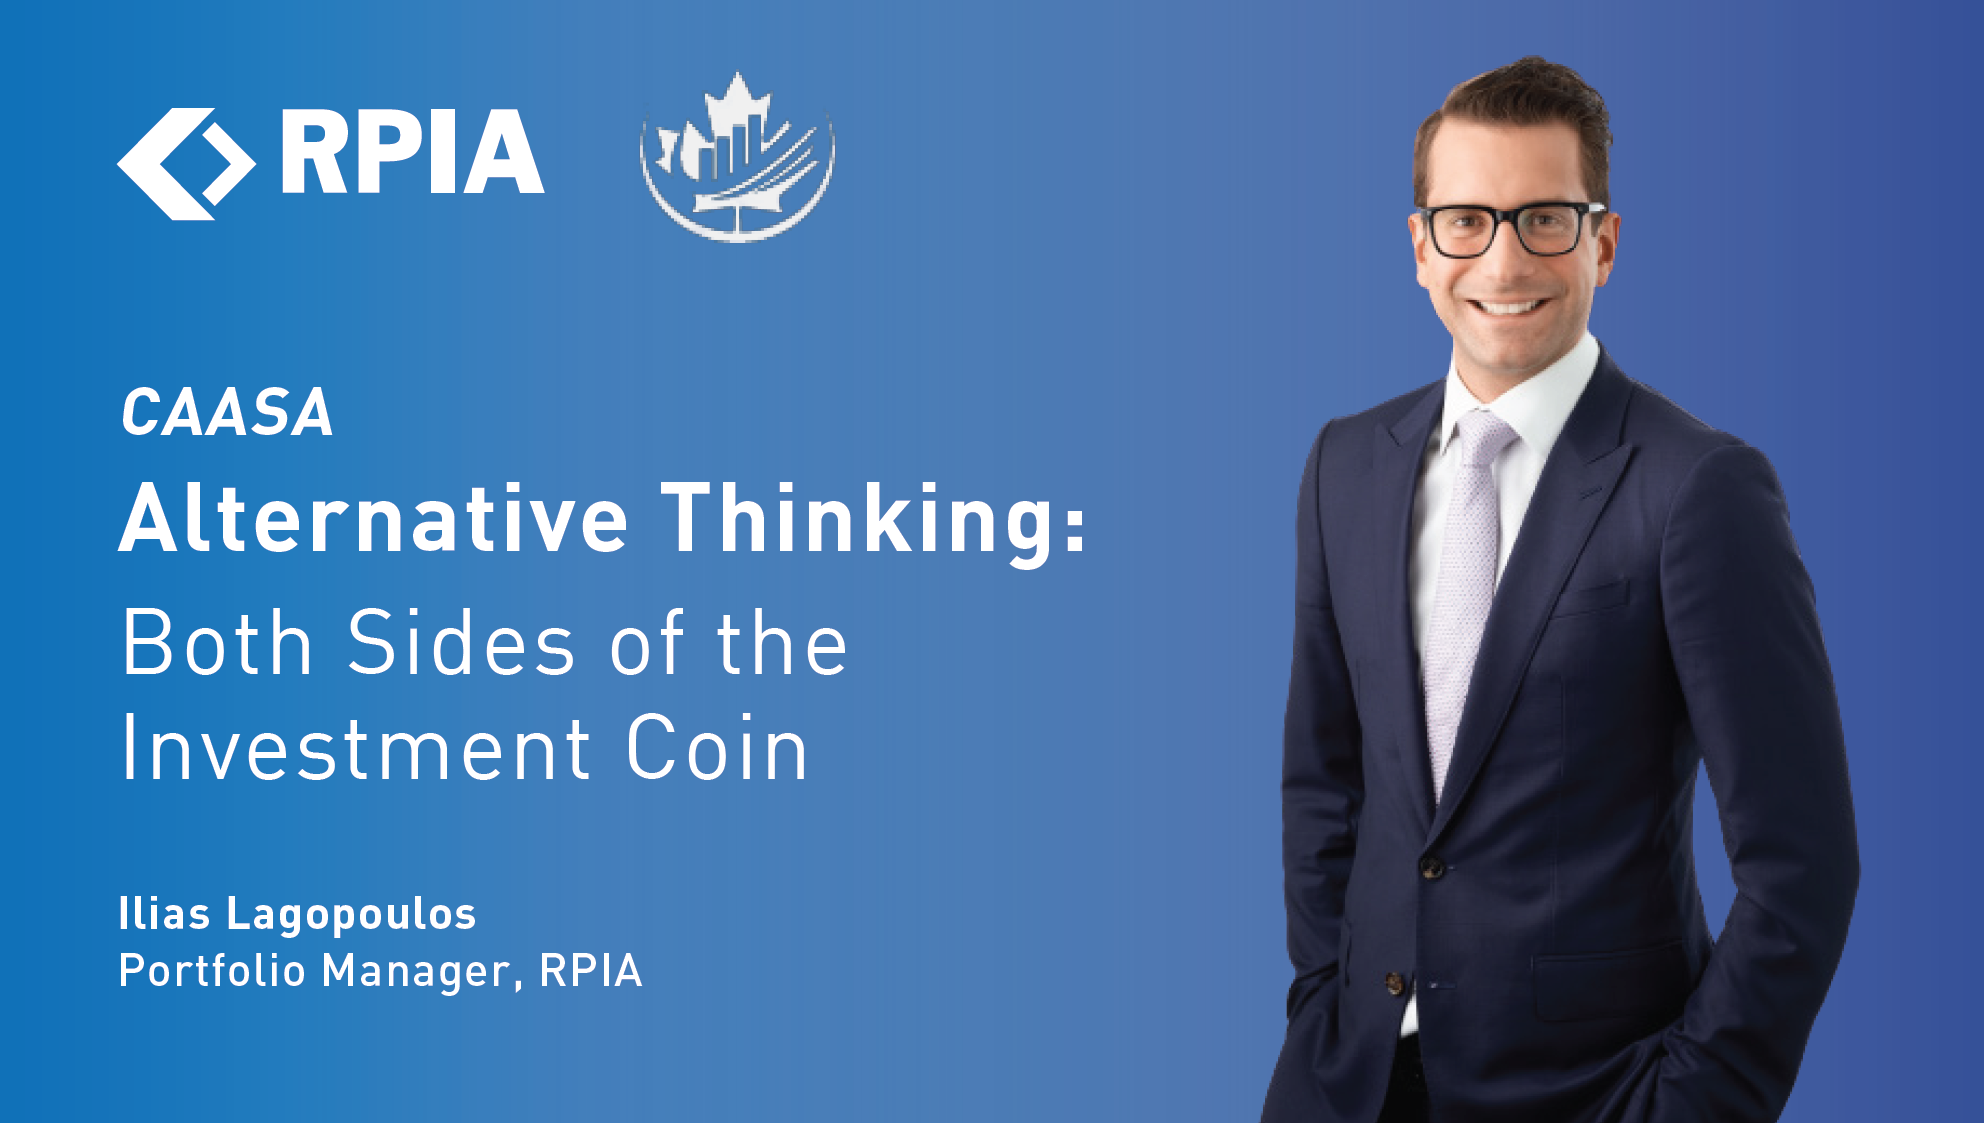 Alternative Thinking: Both Sides of the Investment Coin